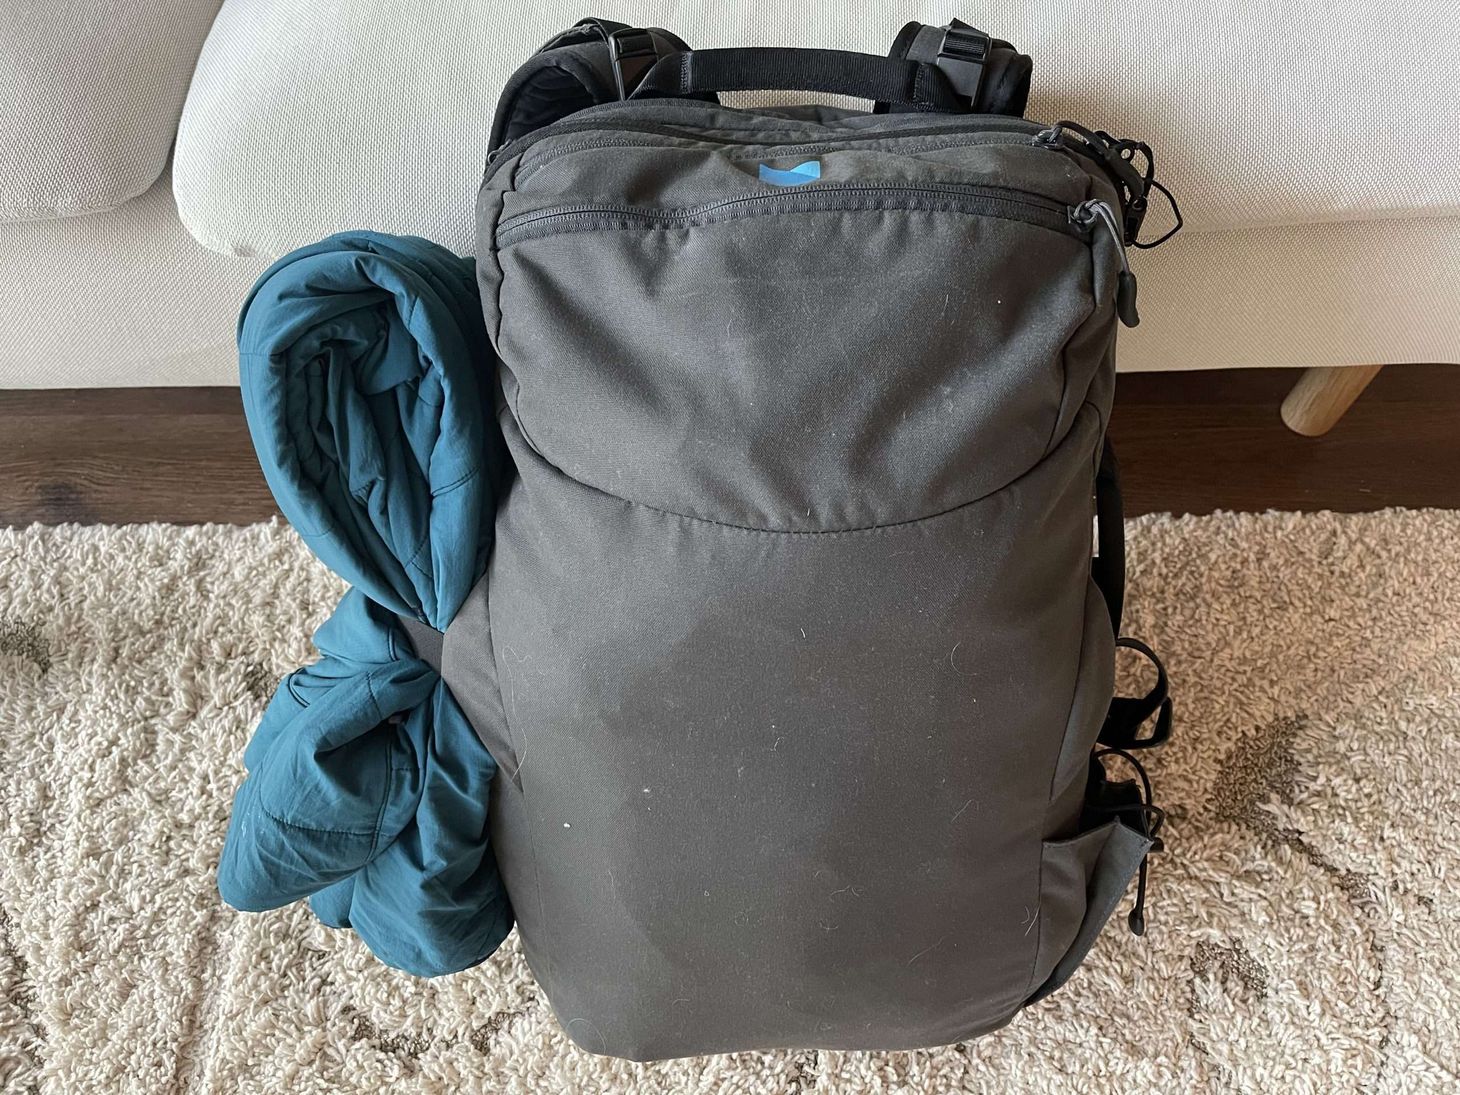 REI Ruckpack 40 Travel Pack Review